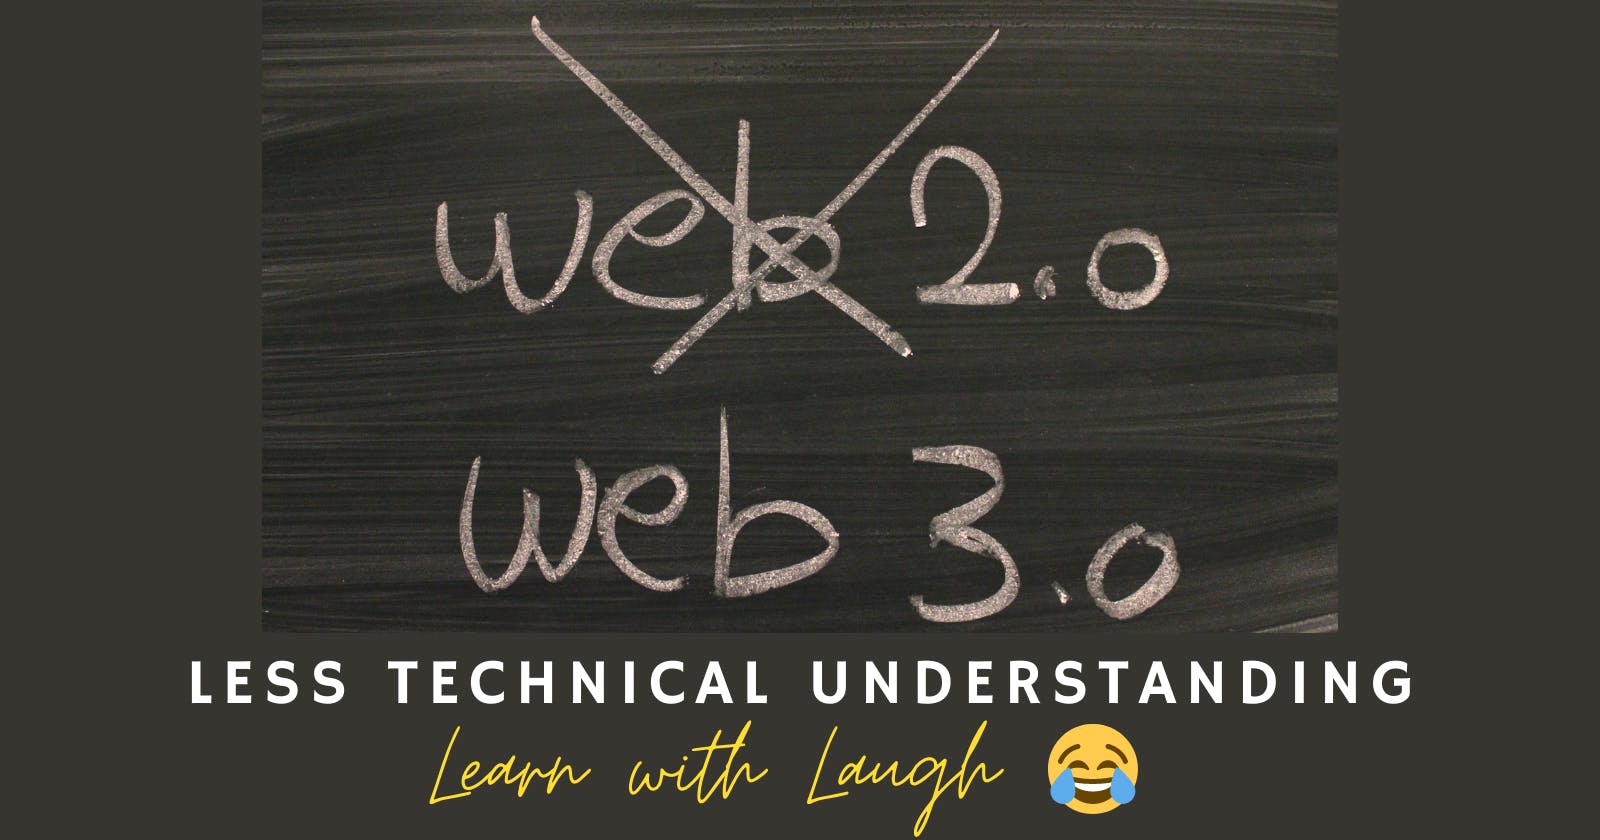 Understanding Web 3.0 in a non-technical way.